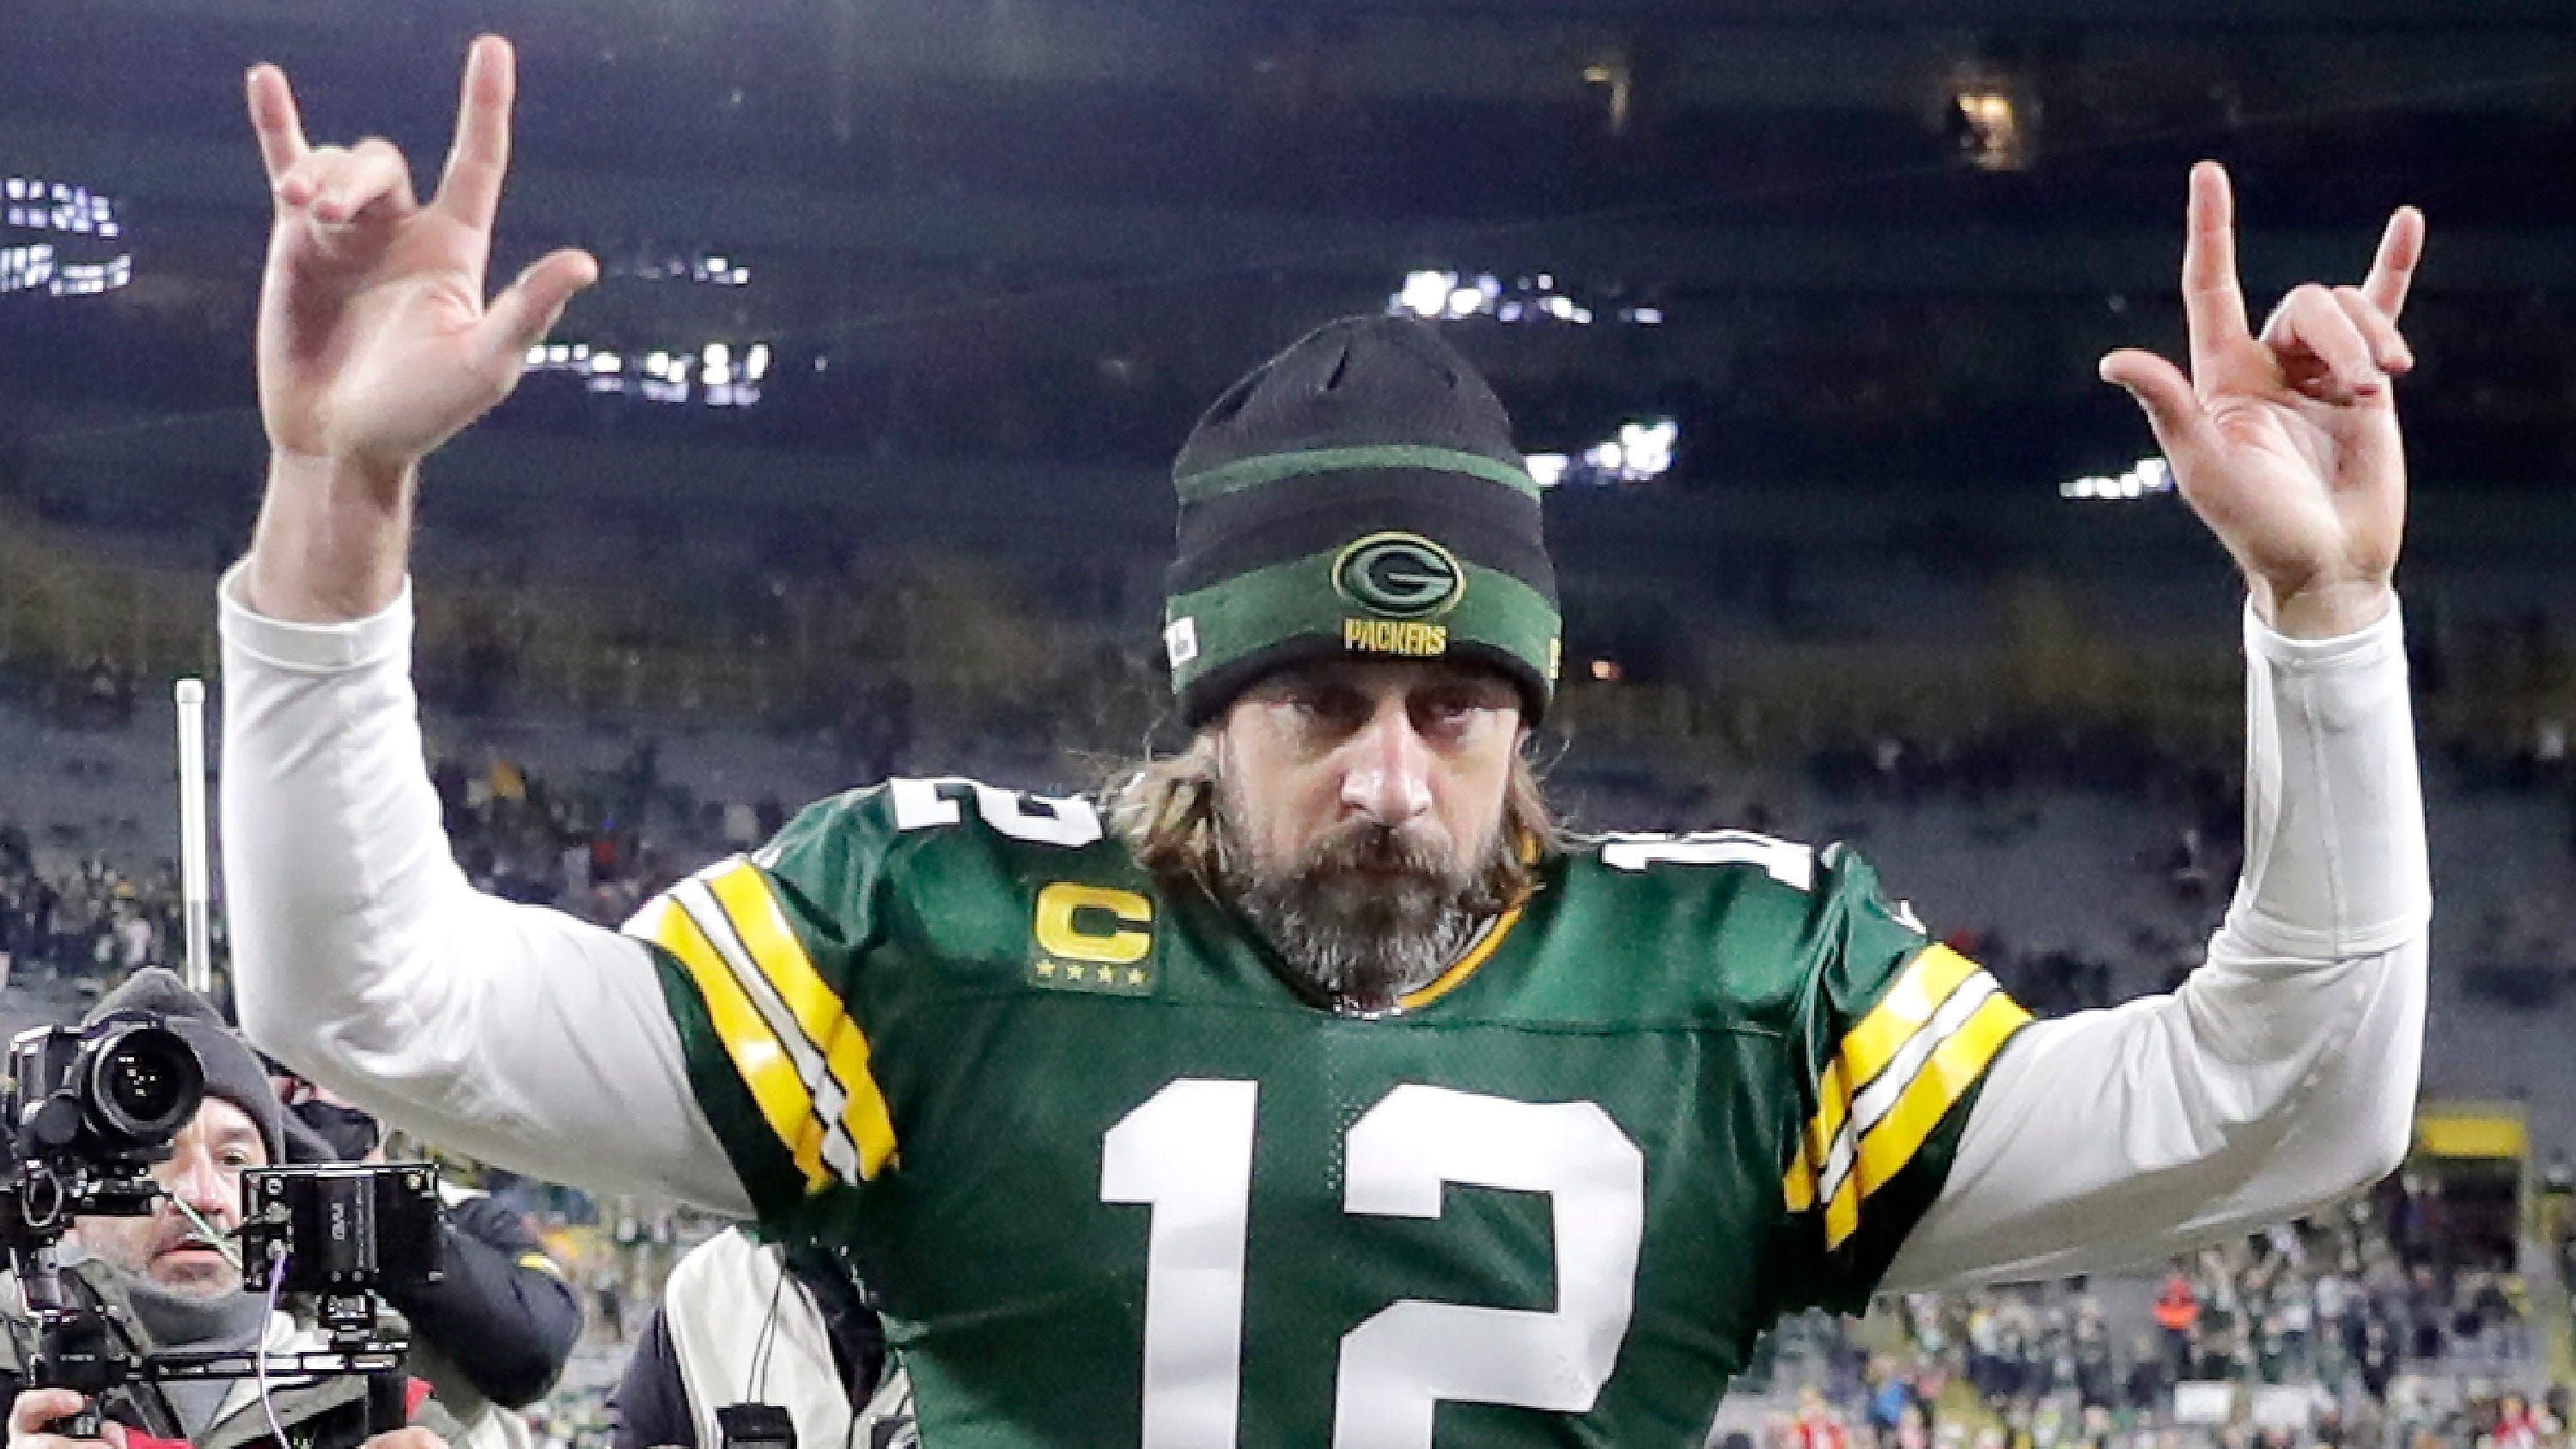 Aaron Rodgers and the Packers have lost four NFC championship games since winning Super Bowl XLV during the 2010 season.